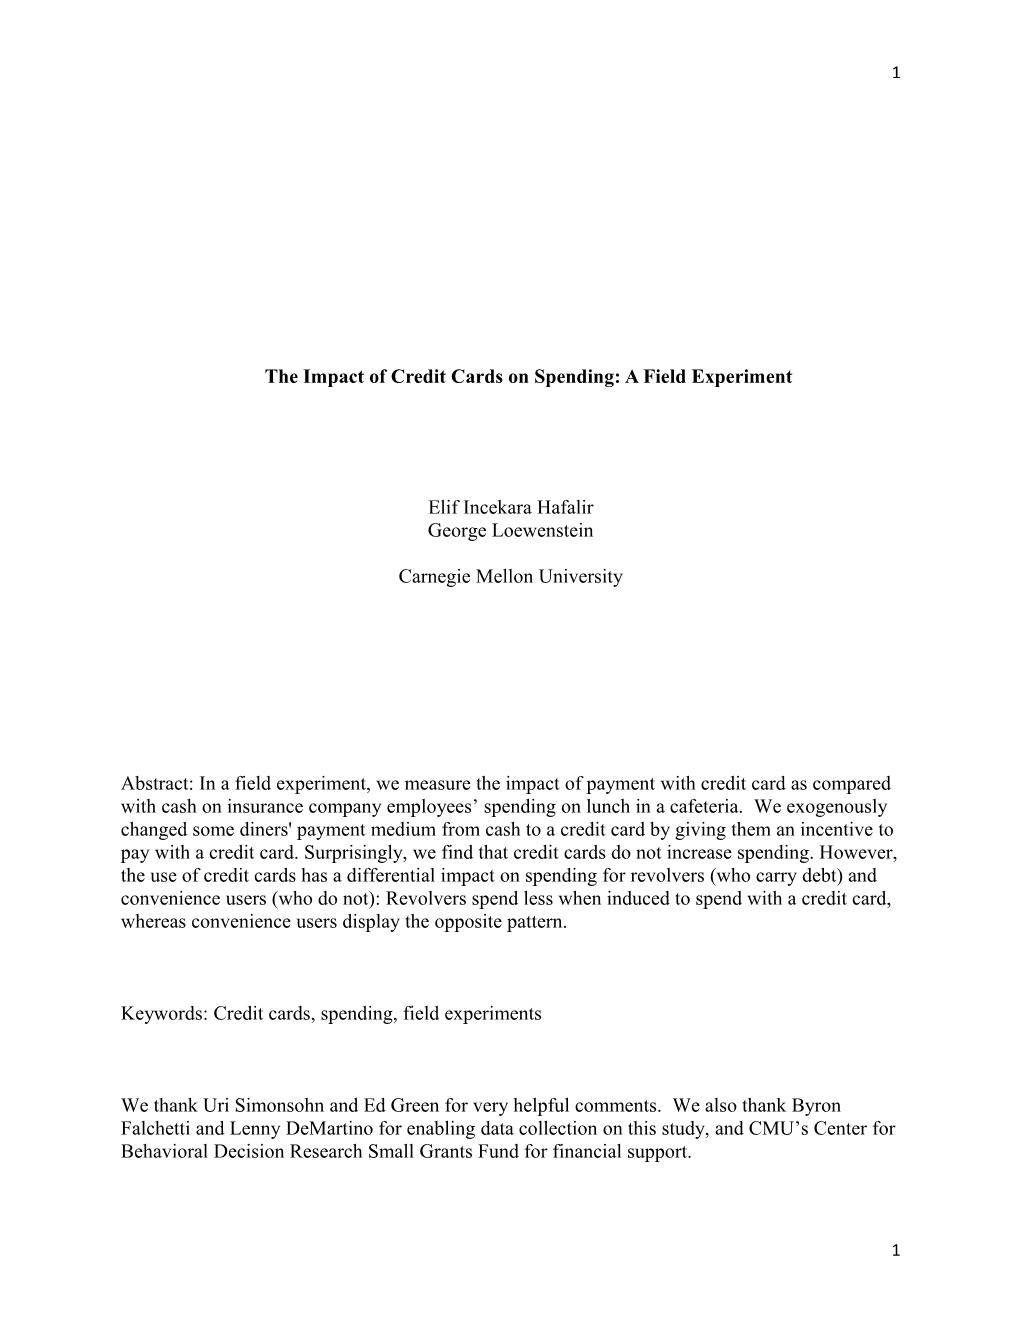 The Impact of Credit Cards on Spending: a Field Experiment